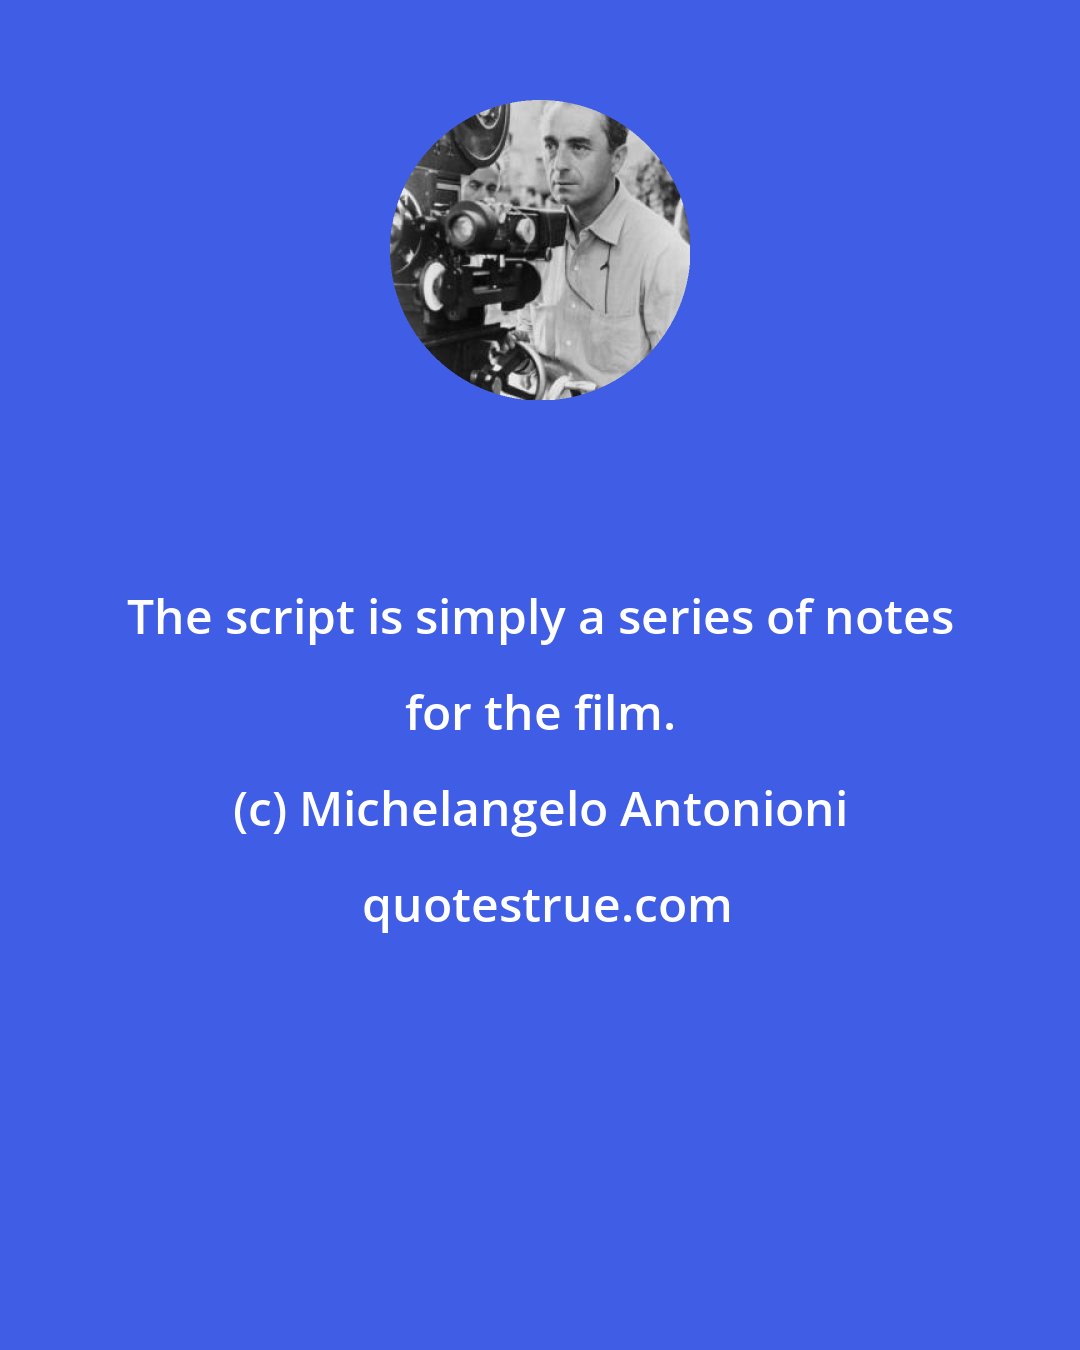 Michelangelo Antonioni: The script is simply a series of notes for the film.